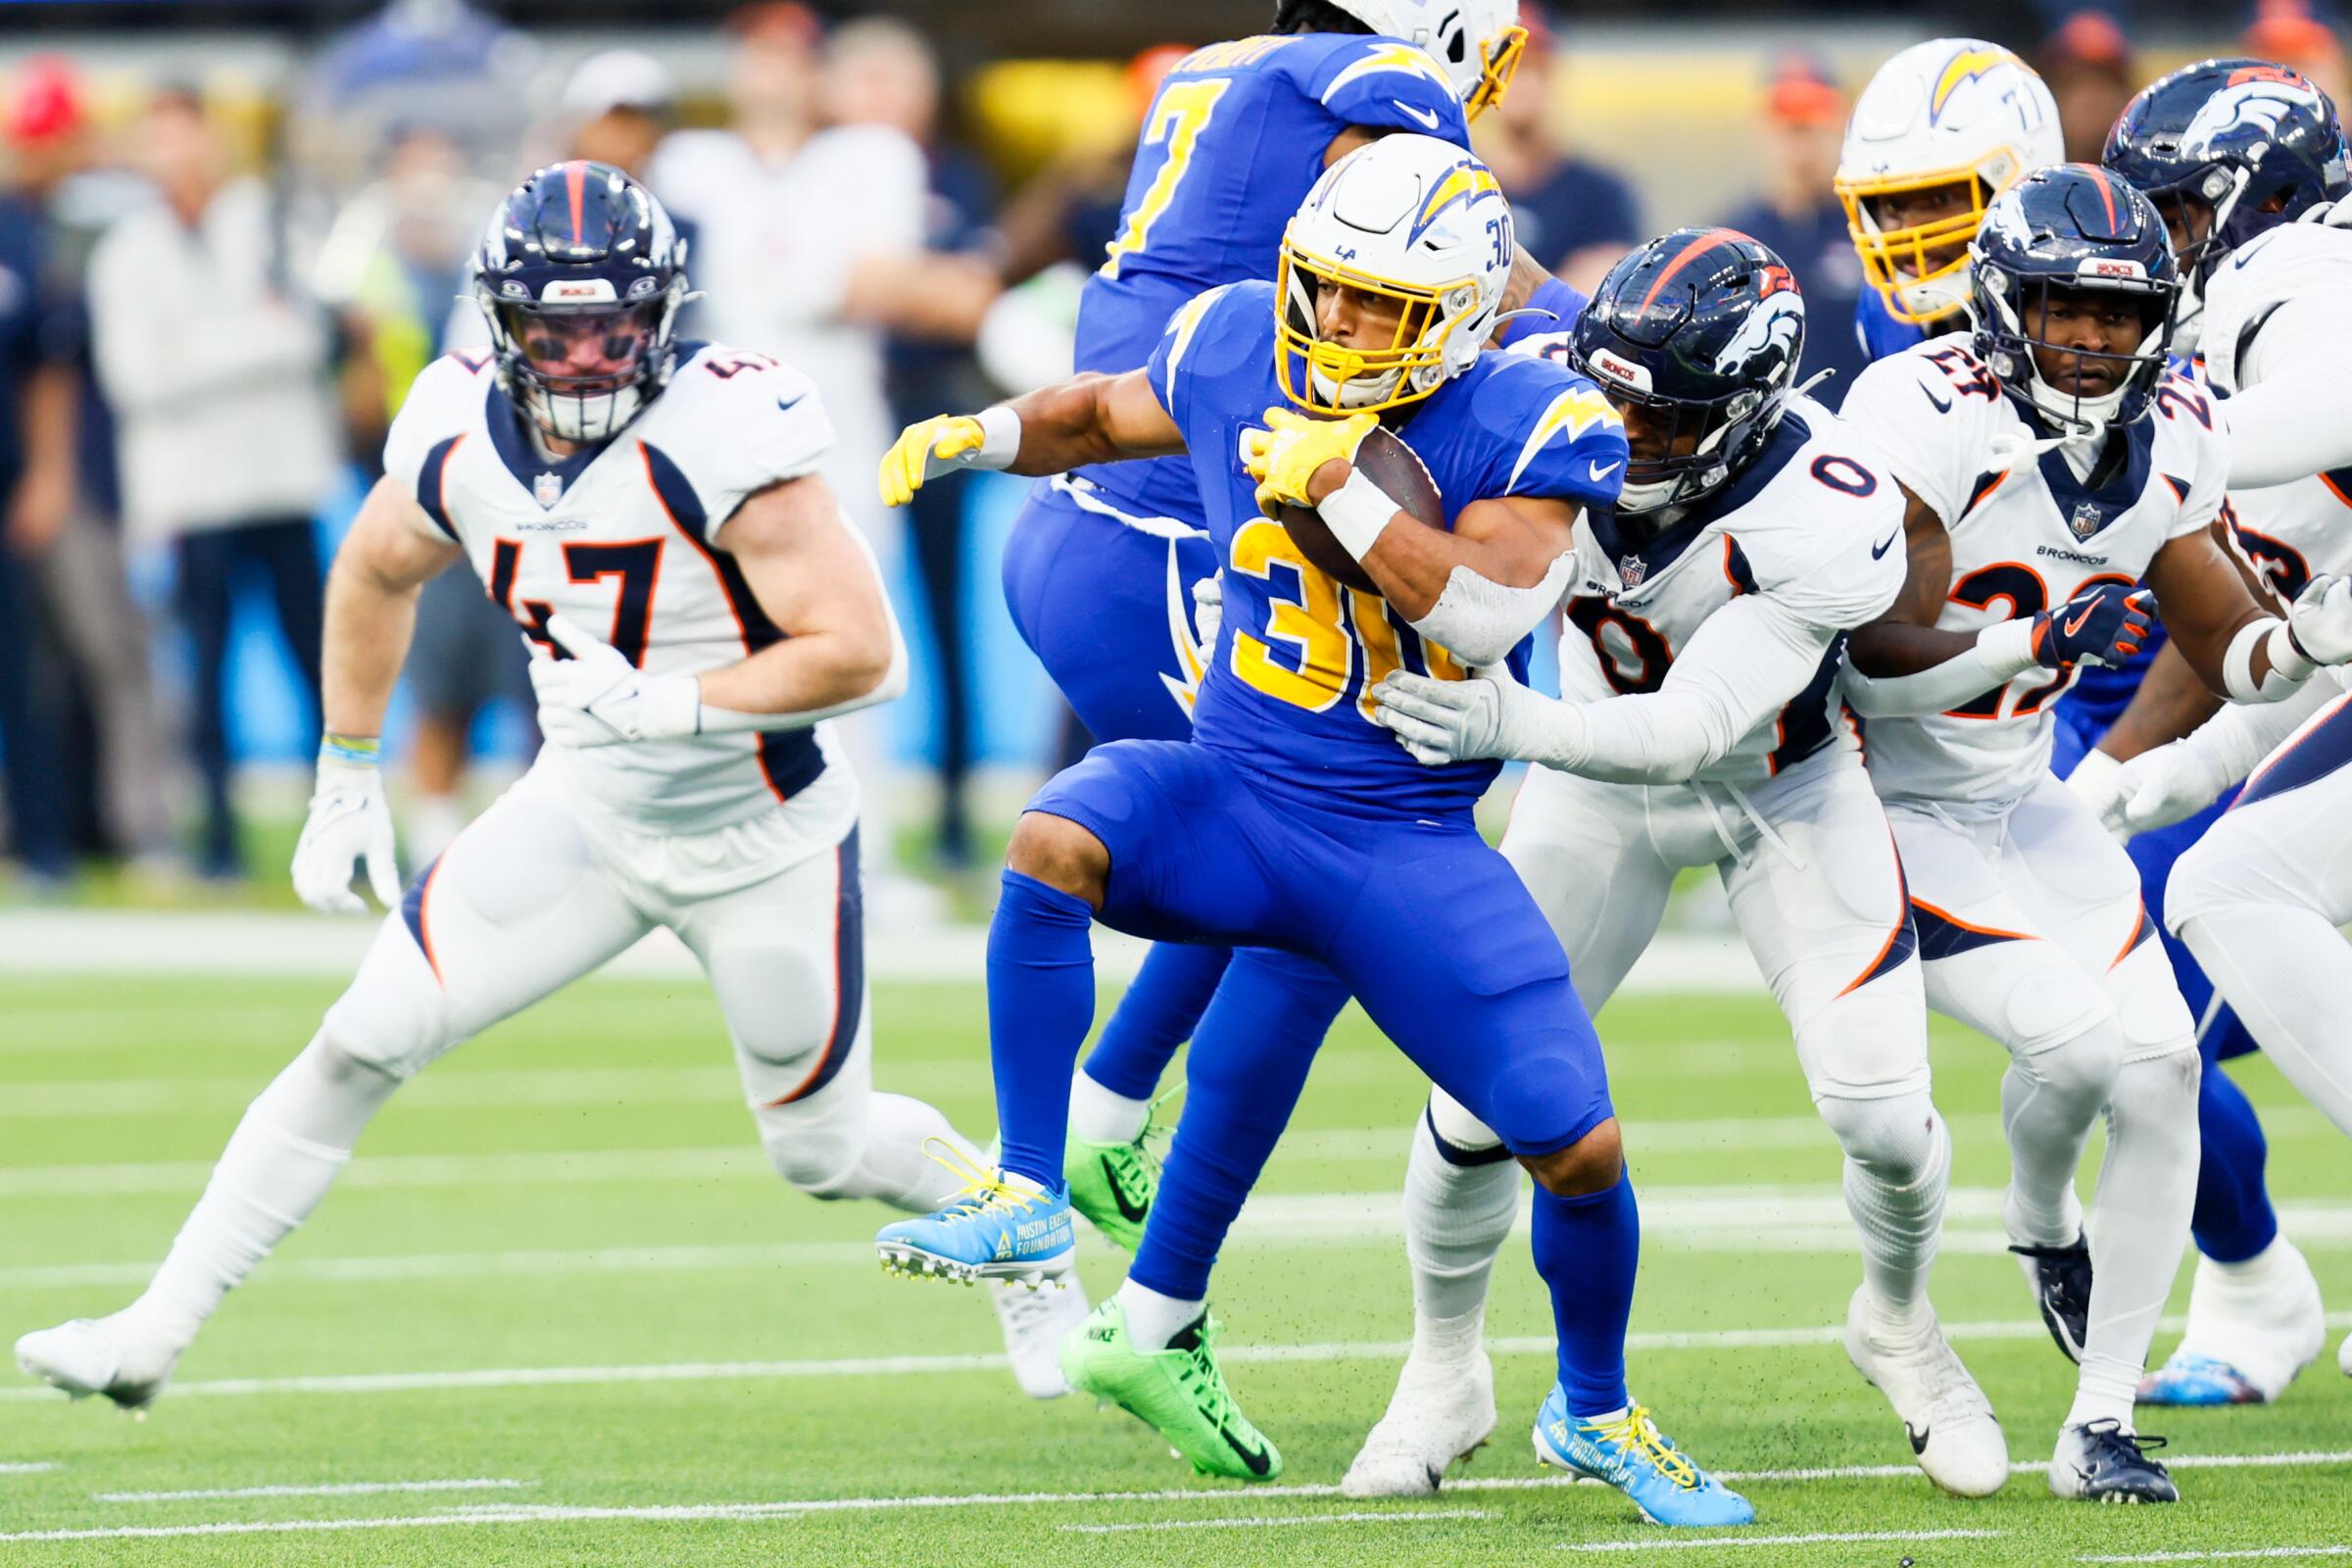 Chargers running back Austin Ekeler tries to evade tackle attempts by Denver defenders during a game last season.